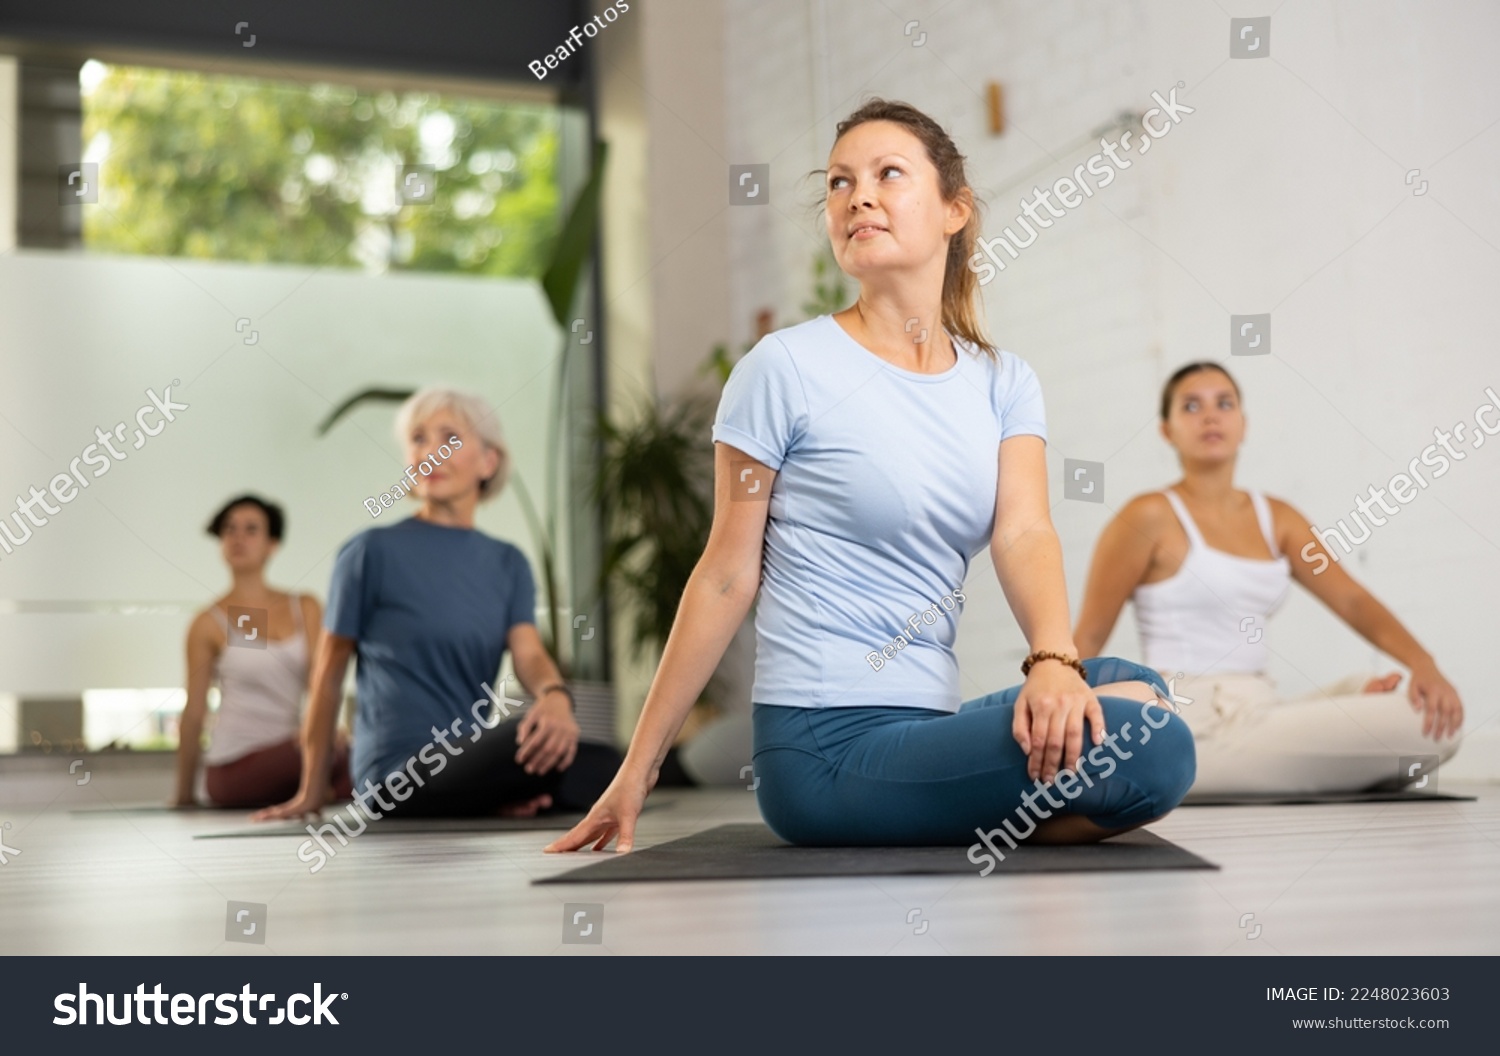 Relaxed middle-aged female performing Ardha Matsyendrasana position during group yoga training in fitness club #2248023603